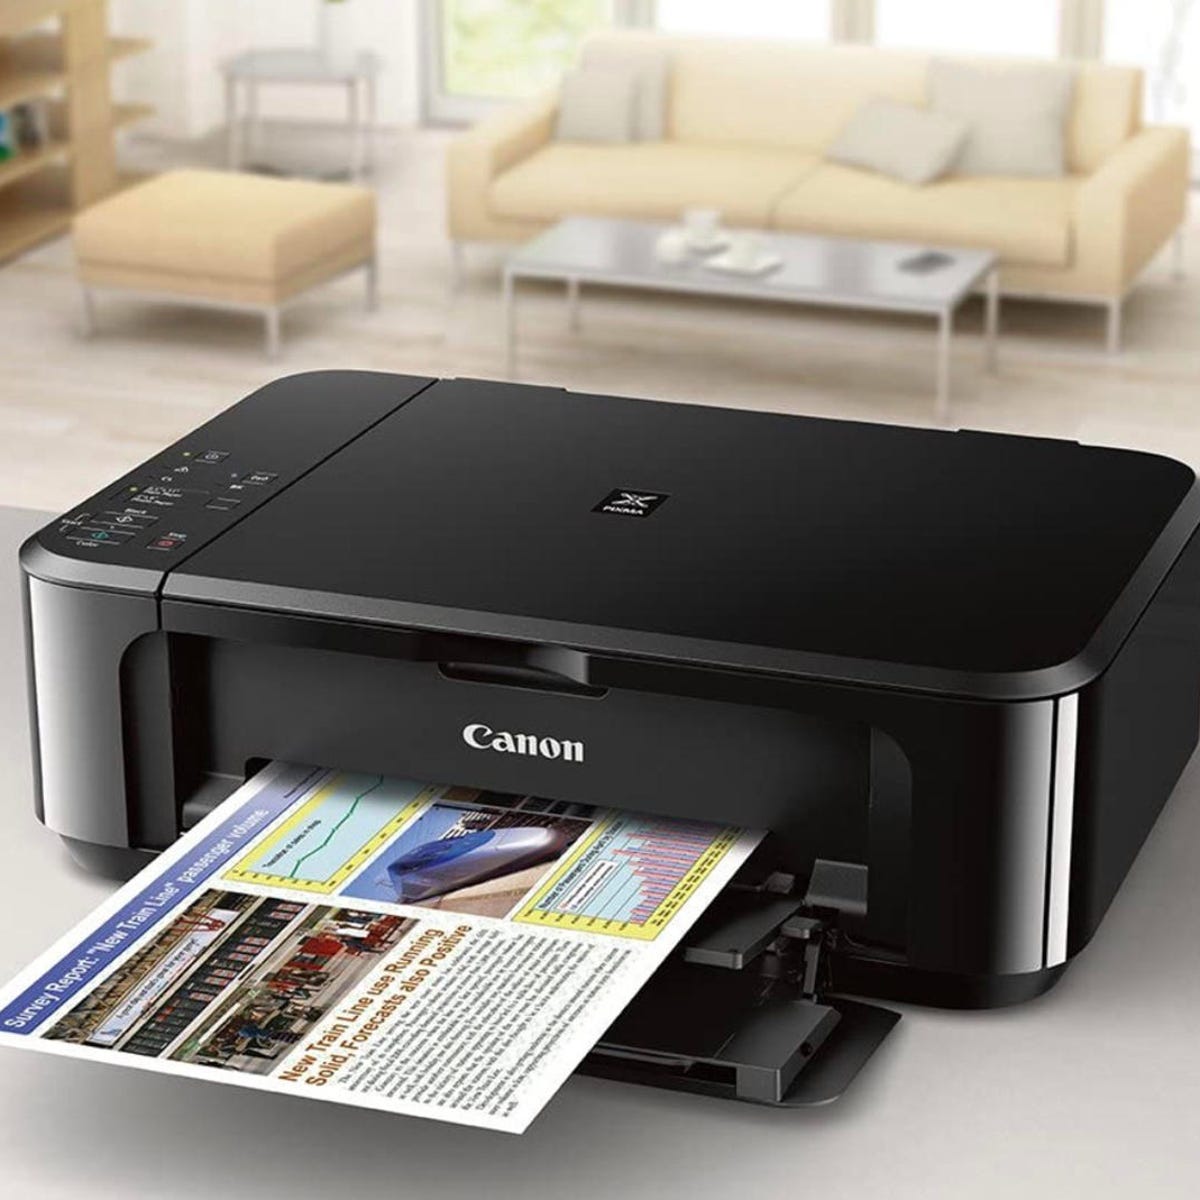 The 9 best printers 2023: Inkjet, photo, and laser ZDNET